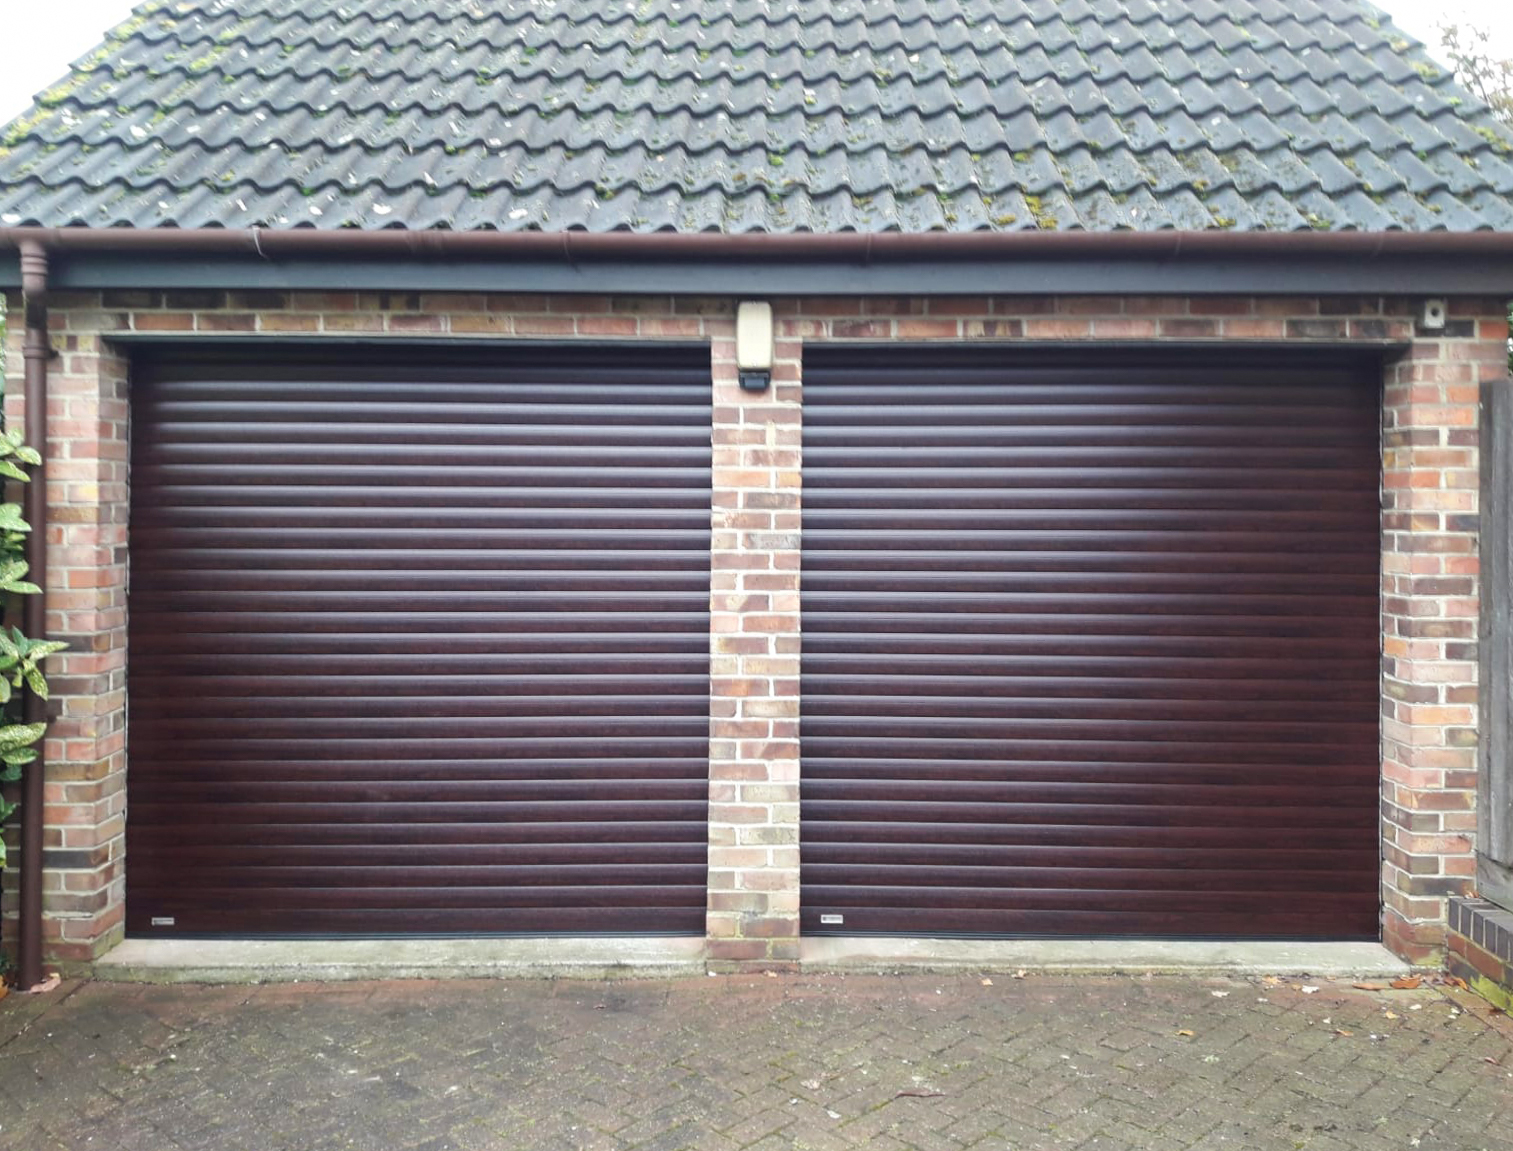 SWS SeceuroGlide Insulated Roller Garage Doors Finished in Woodgrain Rosewood